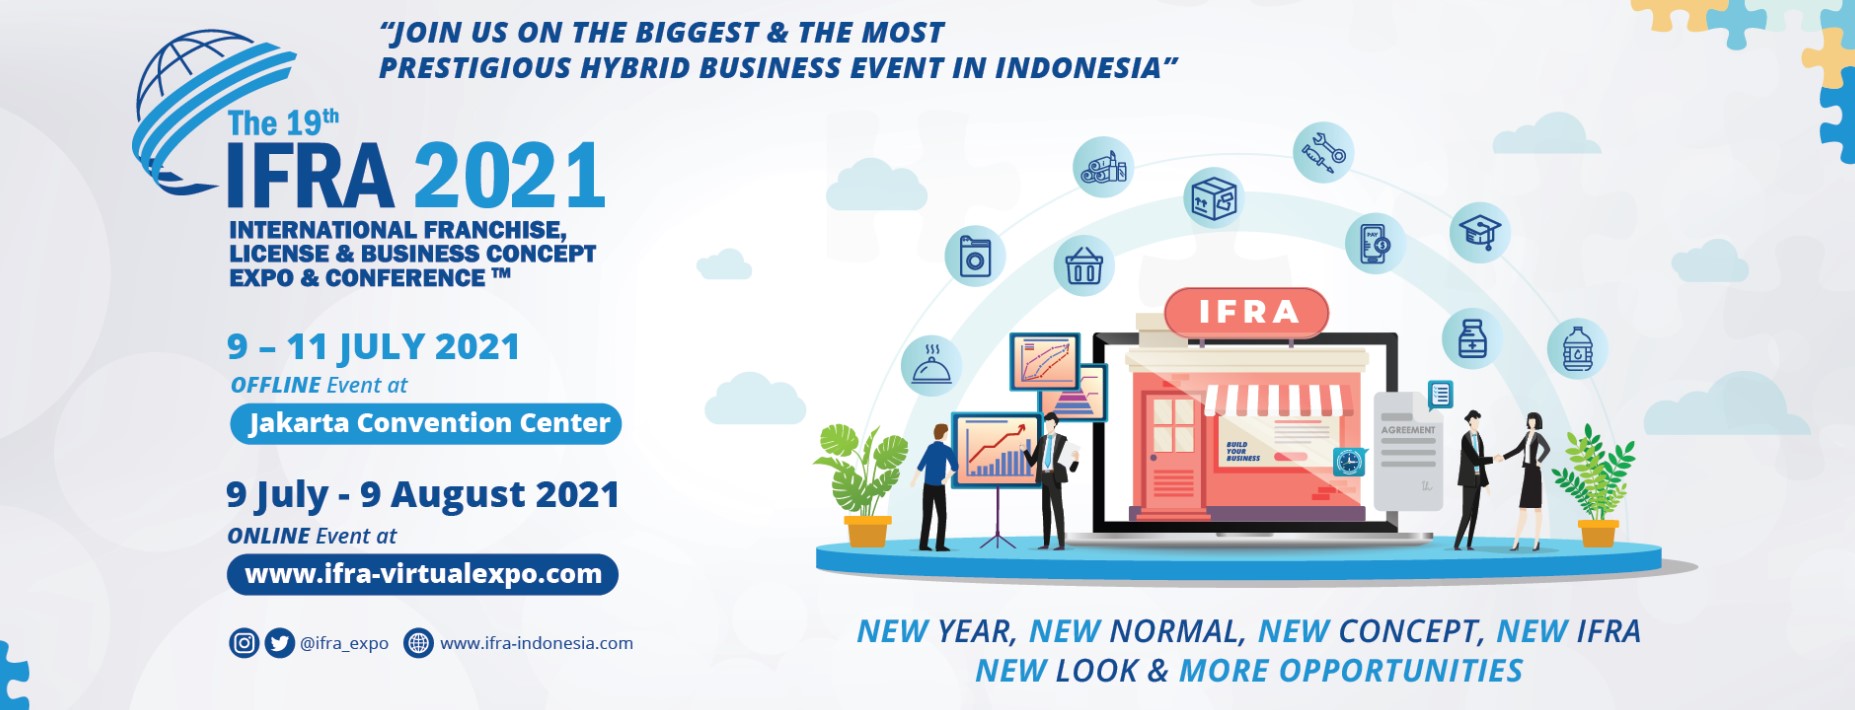 IFRA 2021 (International Franchise, License & Business Concept Expo & Conference)